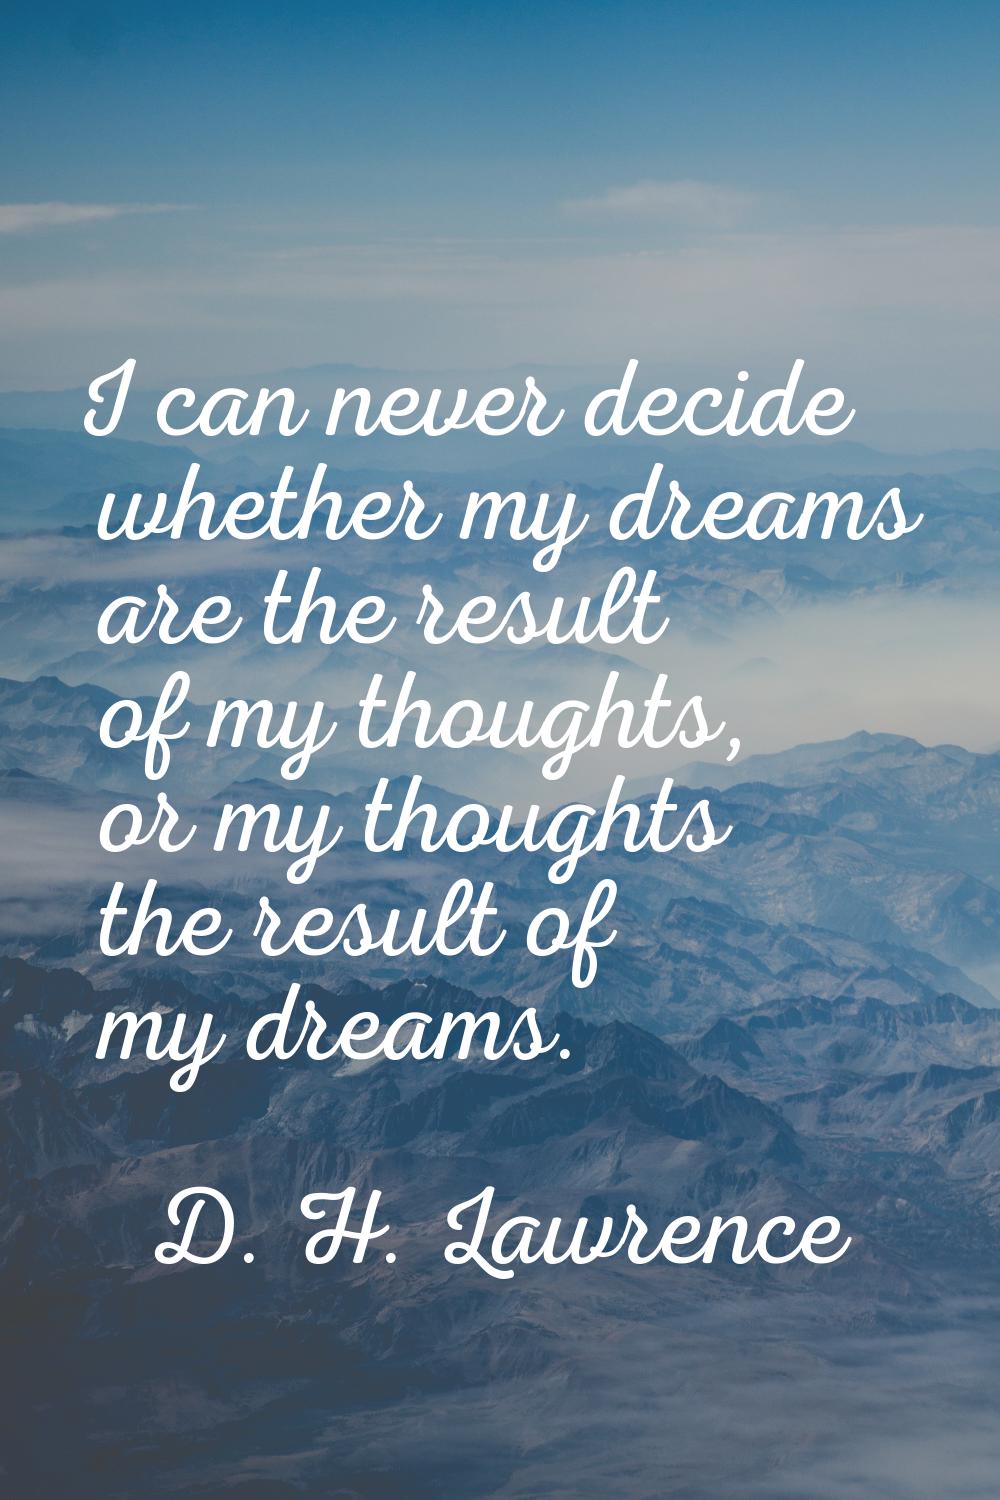 I can never decide whether my dreams are the result of my thoughts, or my thoughts the result of my